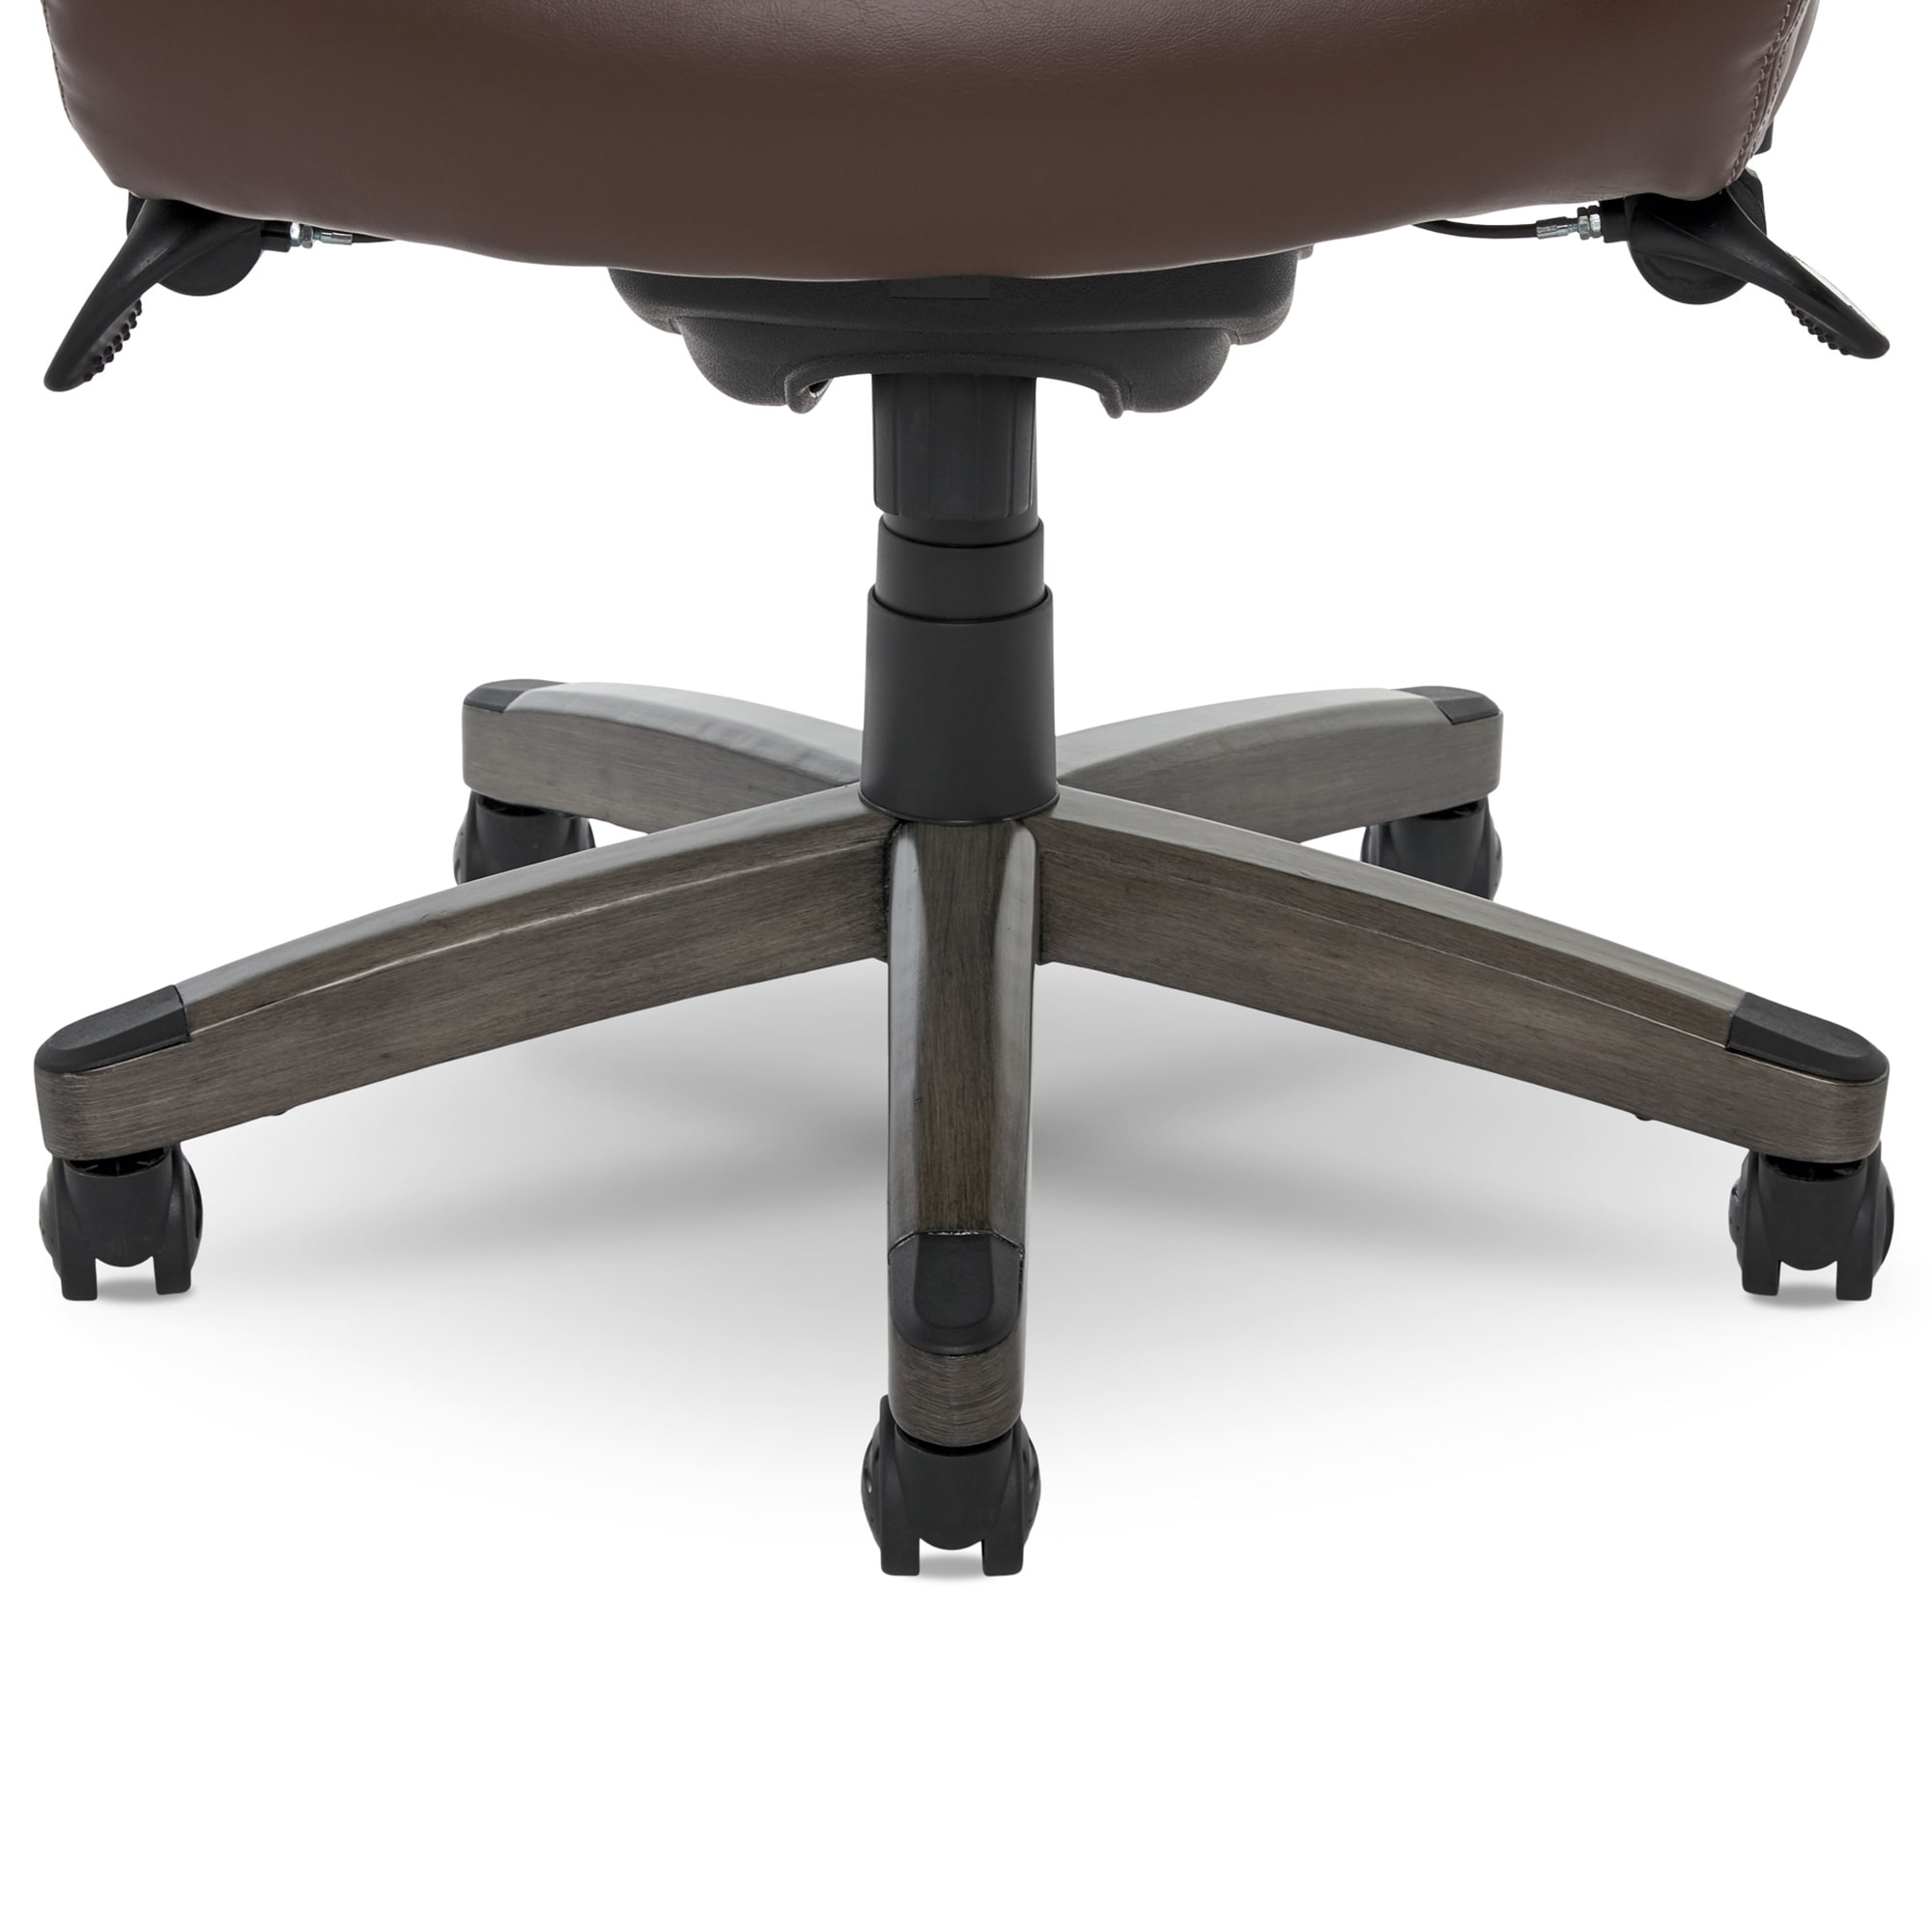 JOMEED CC82 Delano Big and Tall Executive Office Chair with Ergonomic  Lumbar Support, Adjustable Height, and Comfort Core Memory Foam, Brown  Leather